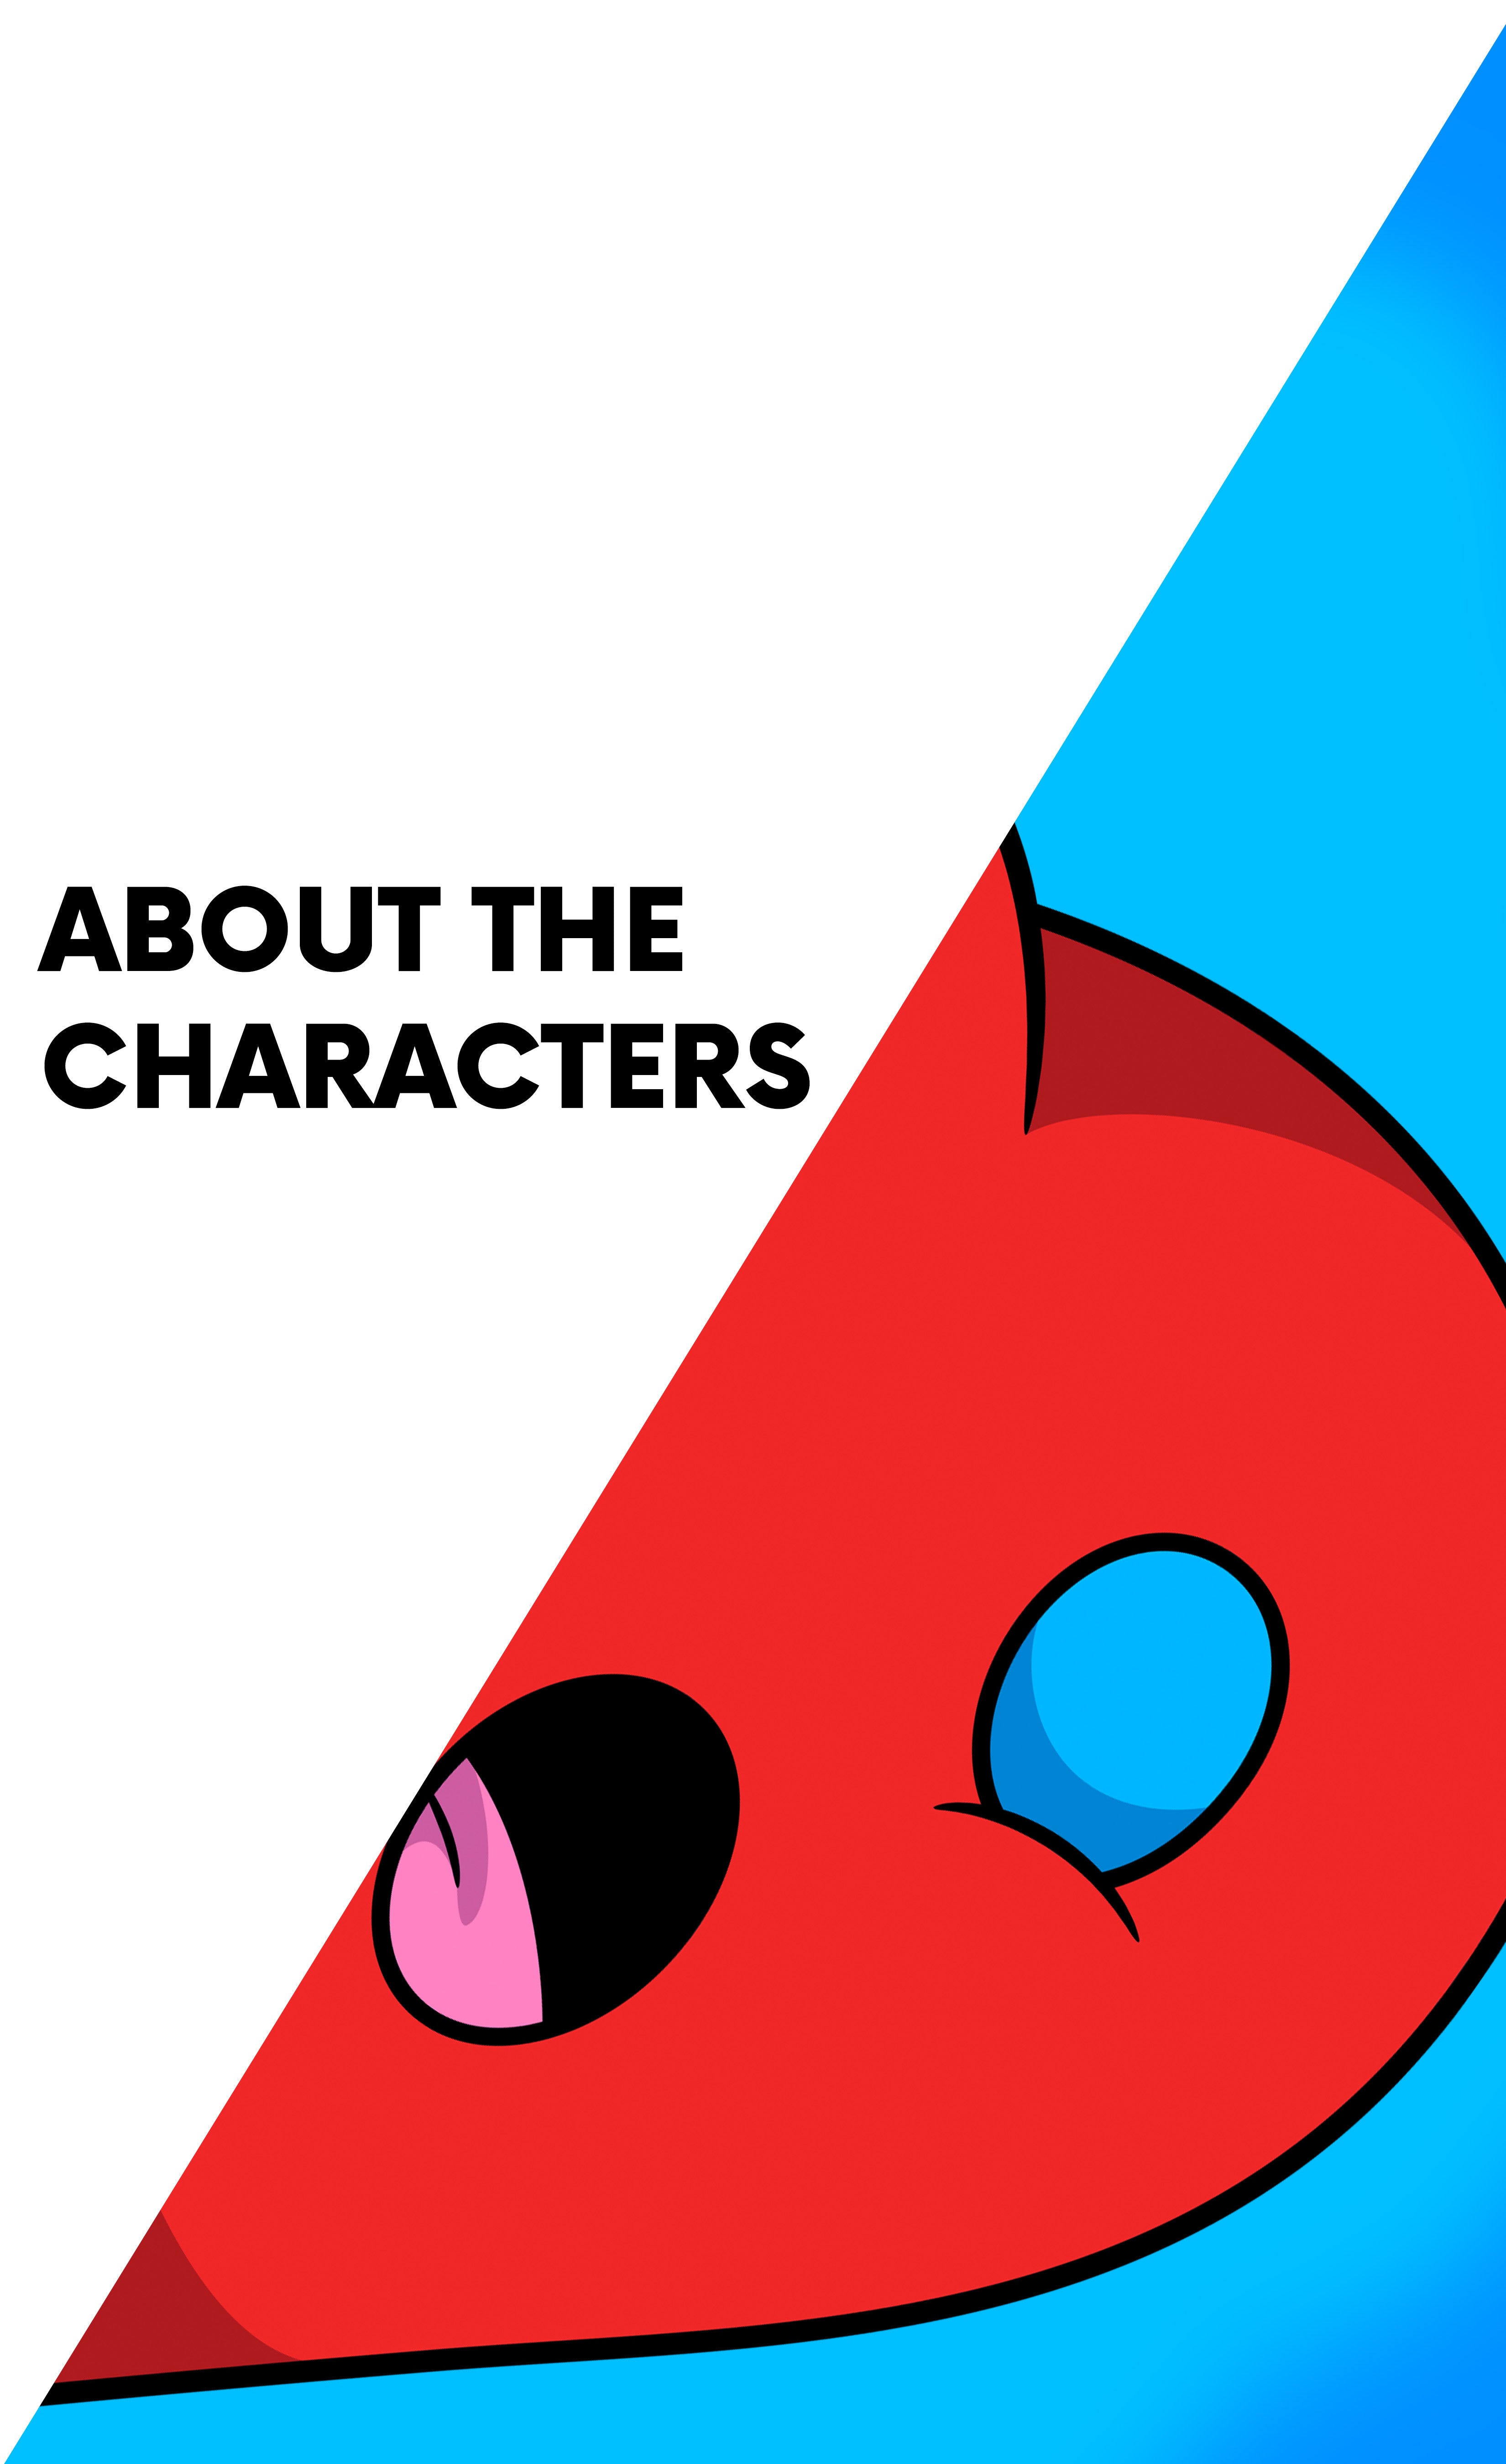 ABOUT THE CHARACTERS